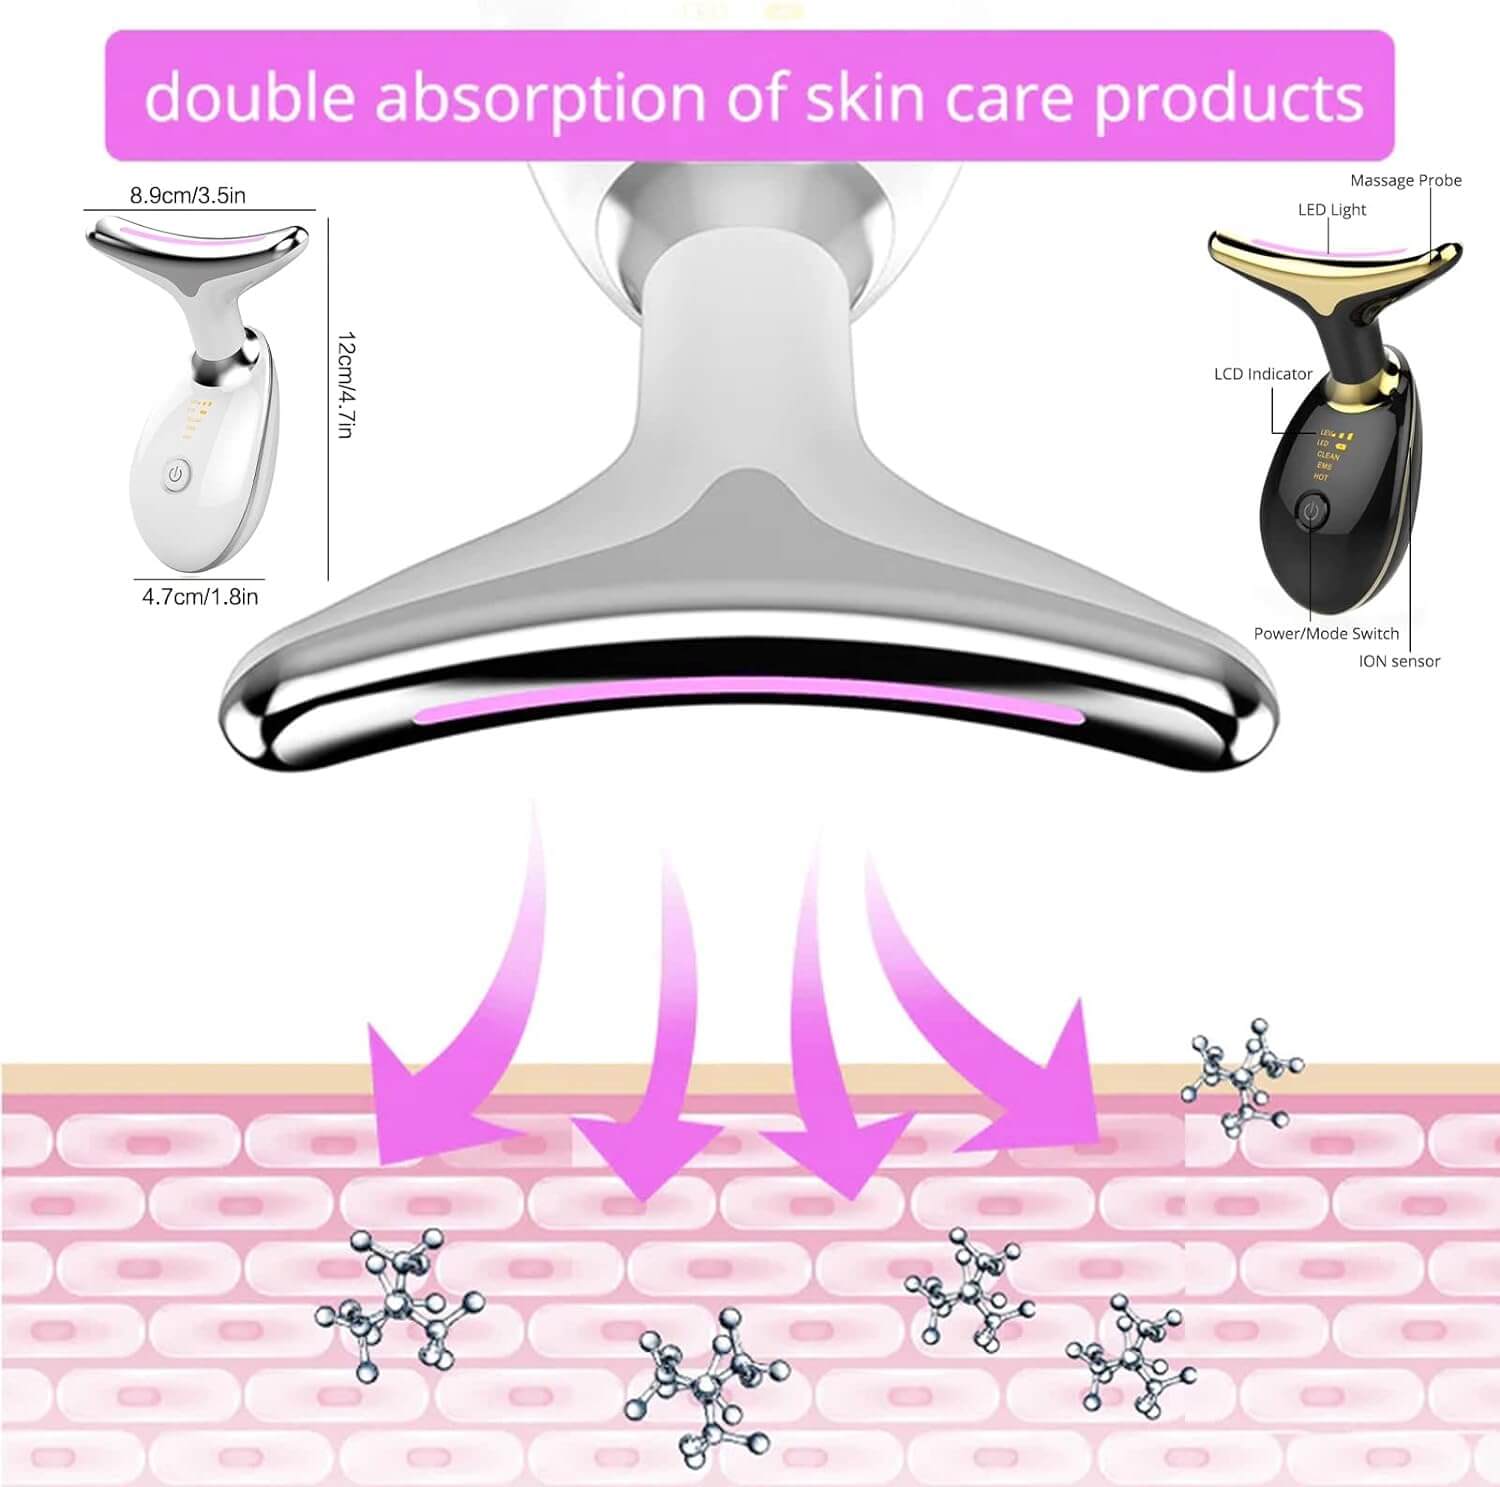 Neck Face Tightening Massager dimensions. 8.9cm/3.5in wide at the head, 4.7cm/1.8in wide at the bottom, 12cm/4.7in long. Graphic depicting the devices double absorption.